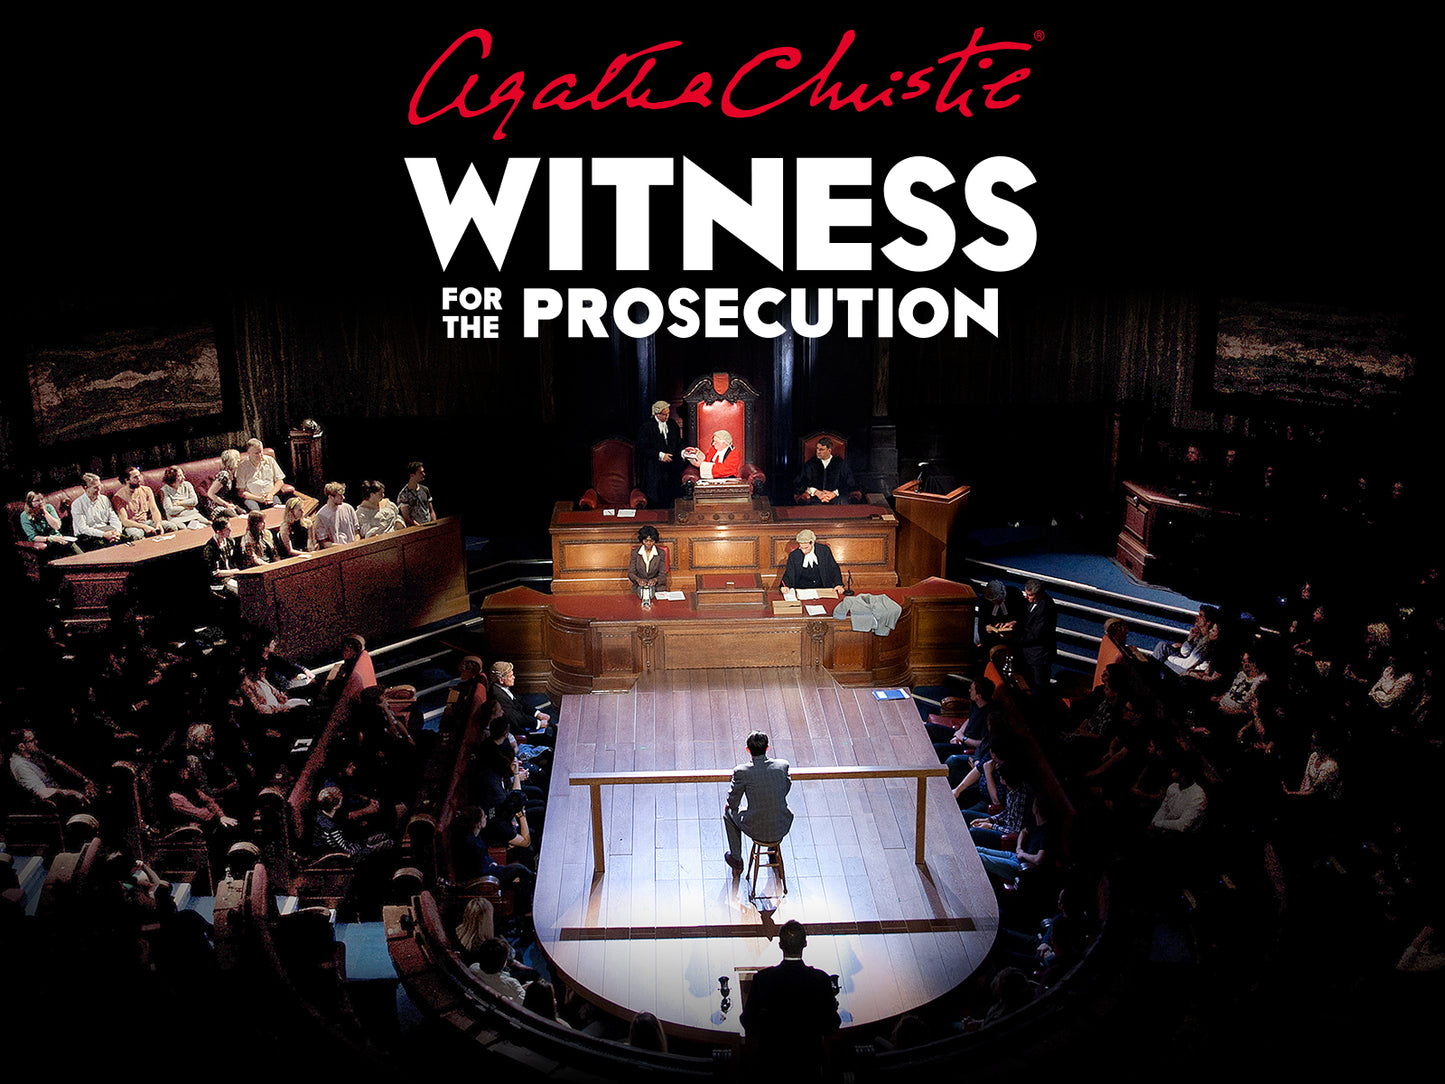 2nt: 3* London stay, breakfast & Witness for The Prosecution: £338 for two